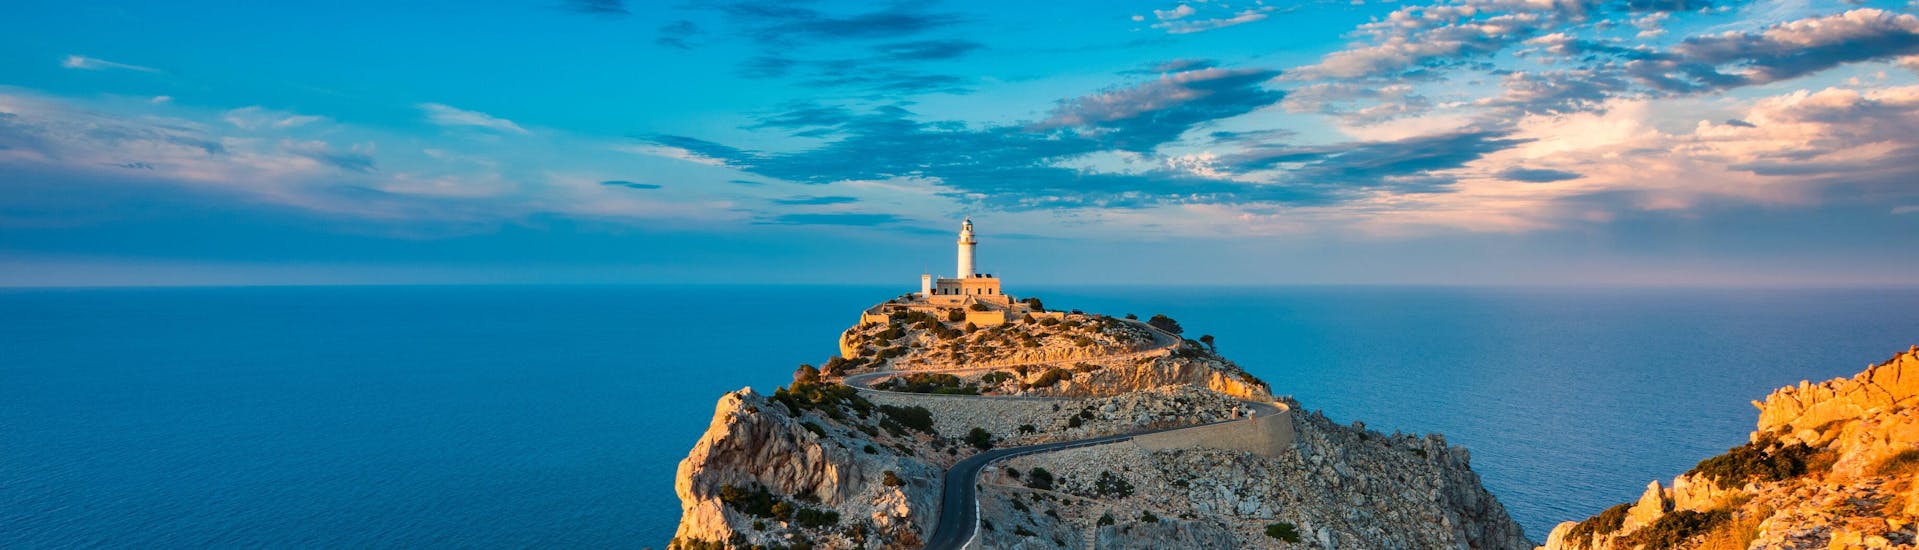 Cap de Formentor and the lighthouse in the background at sunrise.